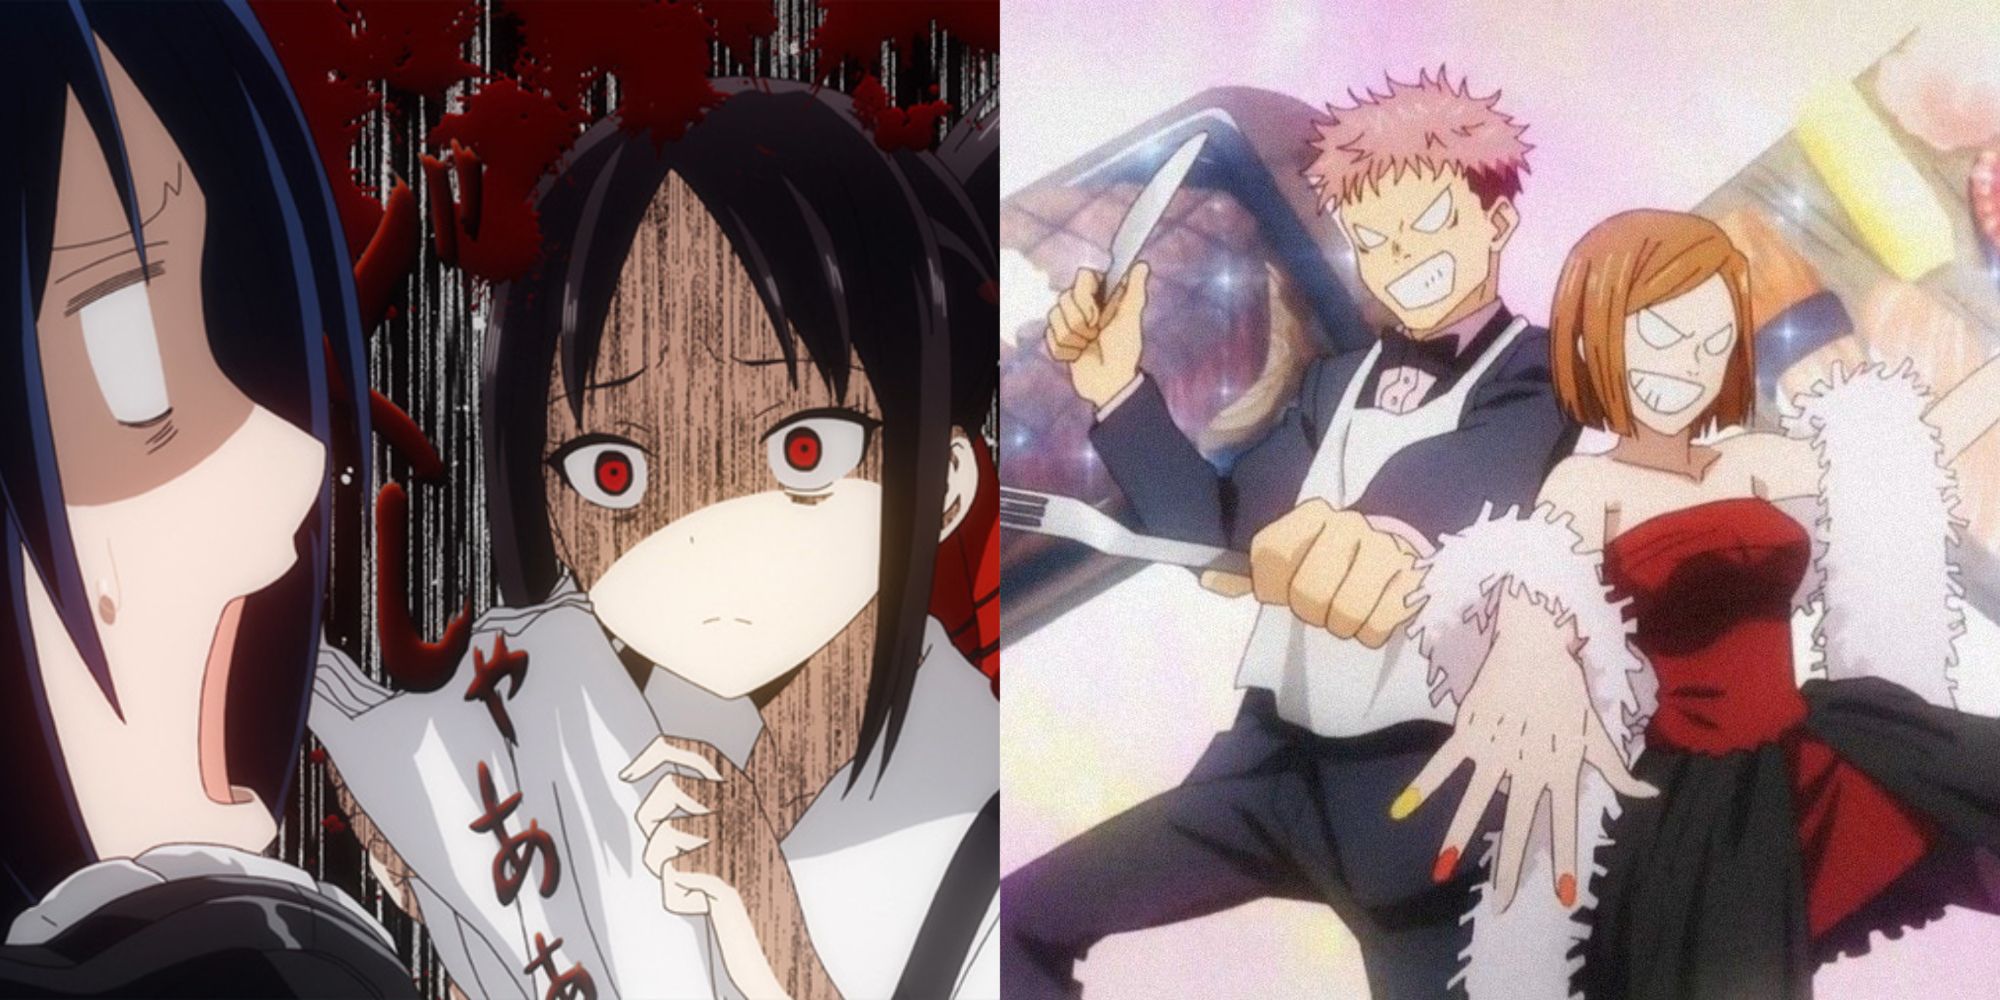 Two side by side images showing relationships in anime.